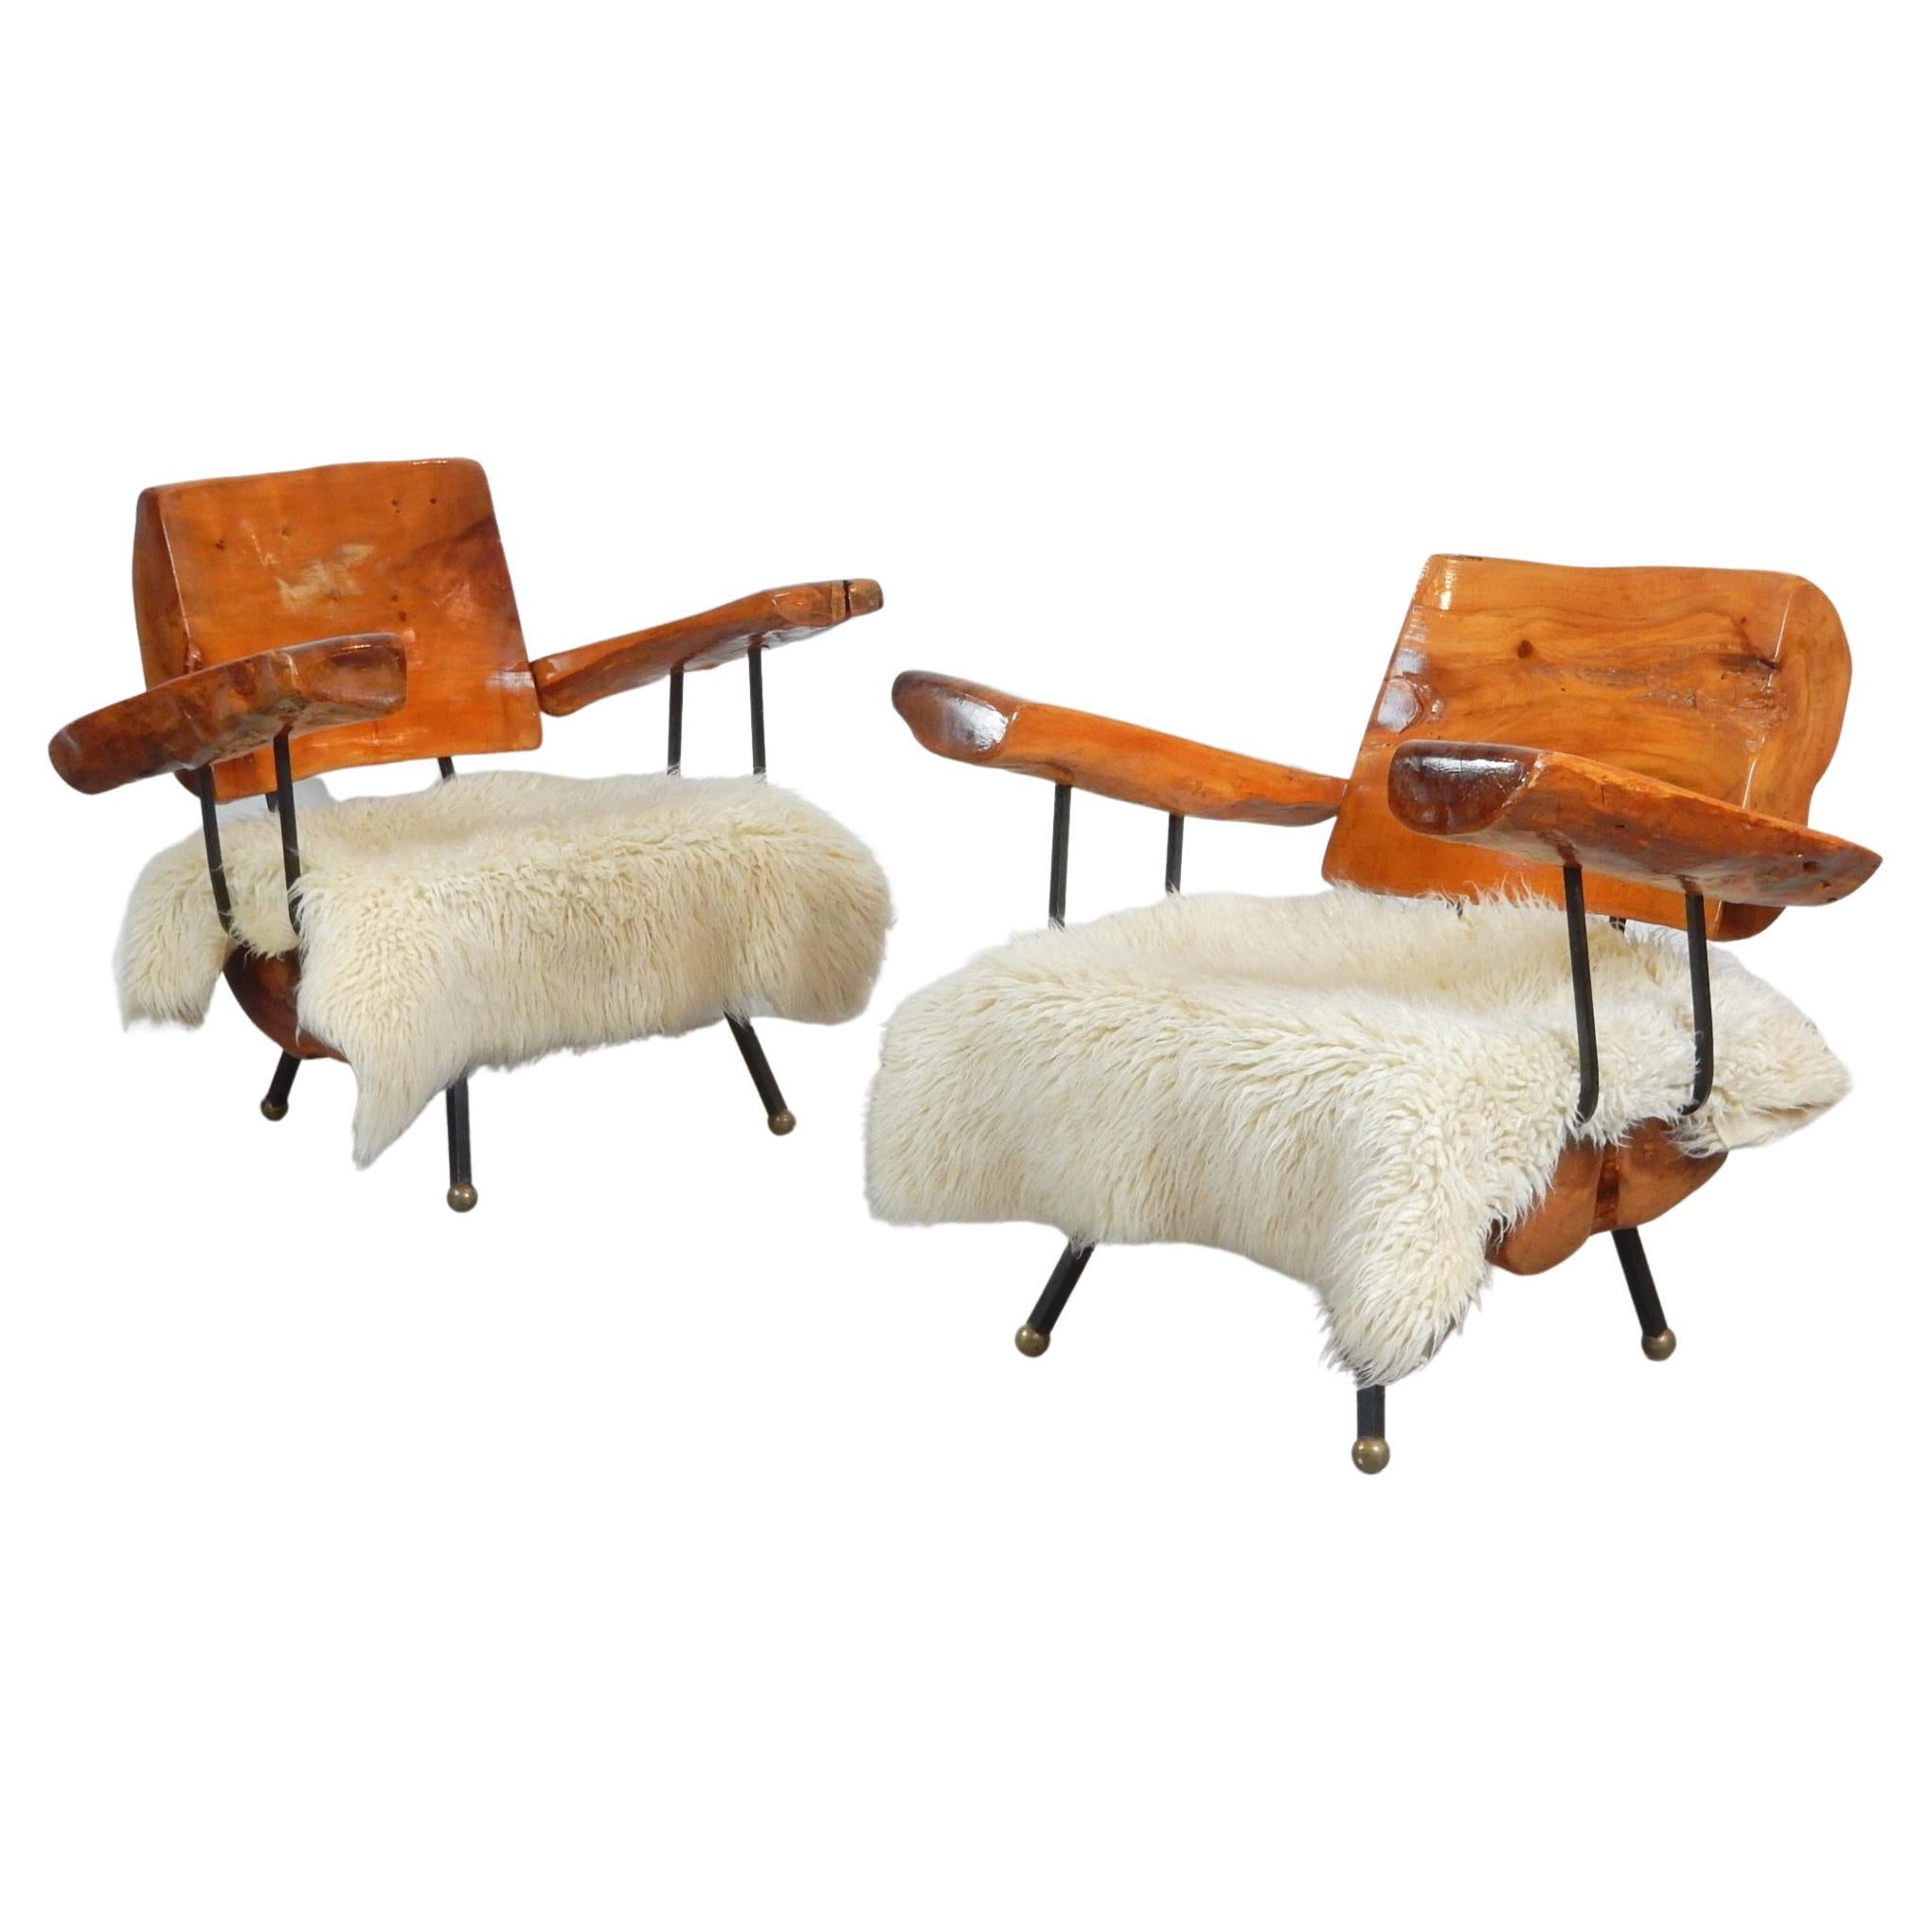 An amazing pair of massive Sabino burl wood lounge chairs.
Legs are hand formed of thick wrought iron with large bronze ball feet.
Comfortable laid back chairs, very heavy and solid.
Matching coffee table available in a separate listing.